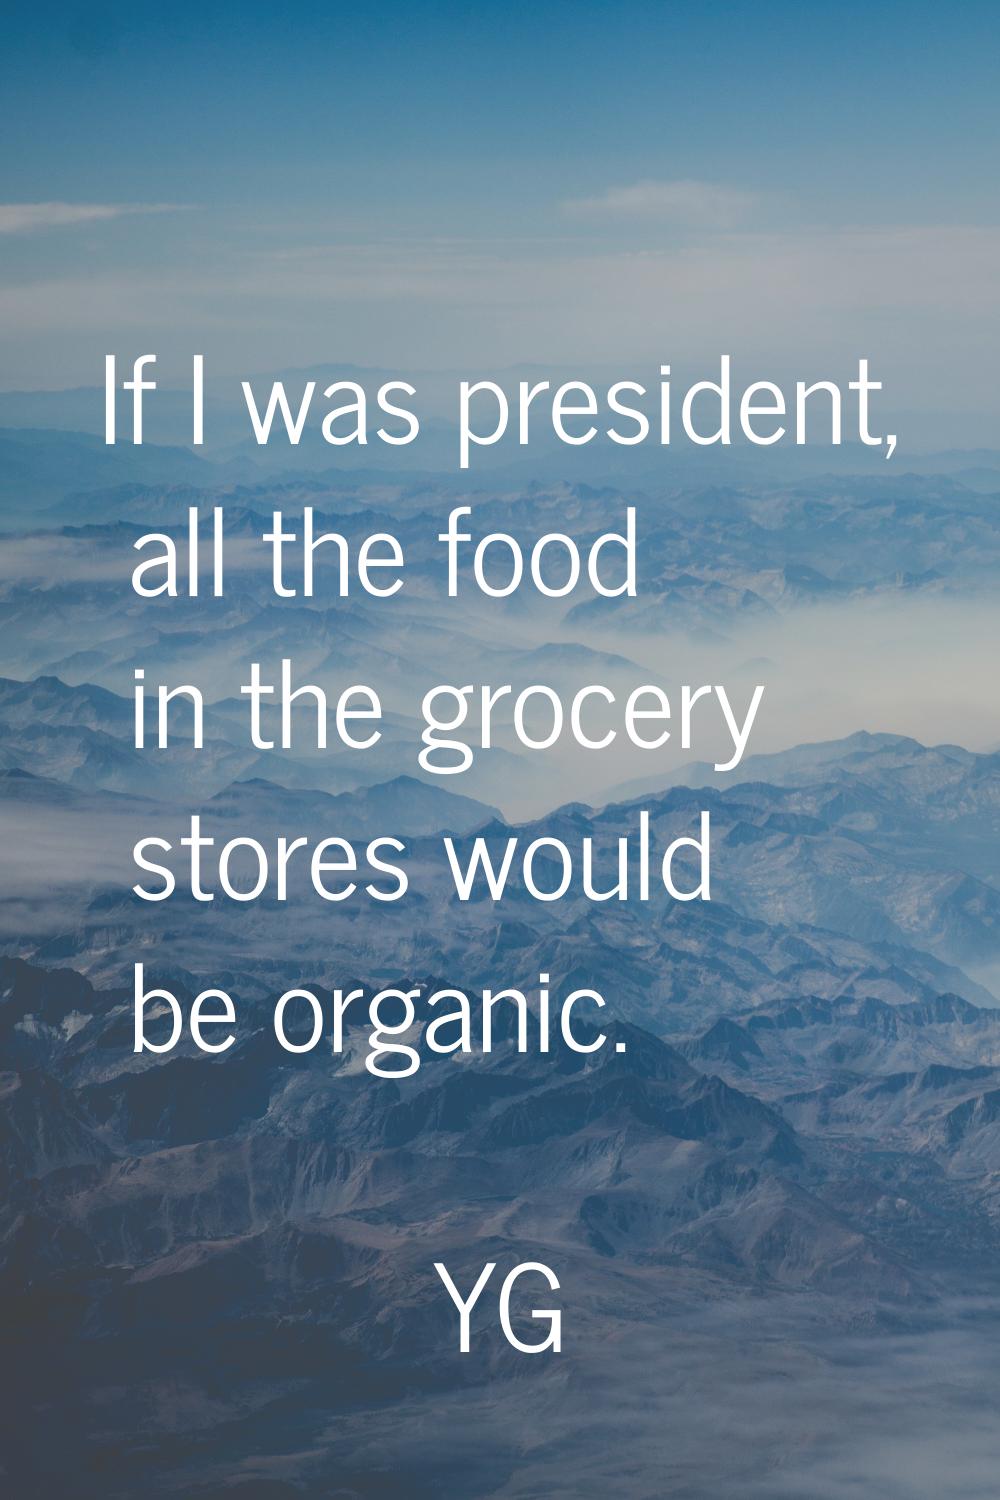 If I was president, all the food in the grocery stores would be organic.